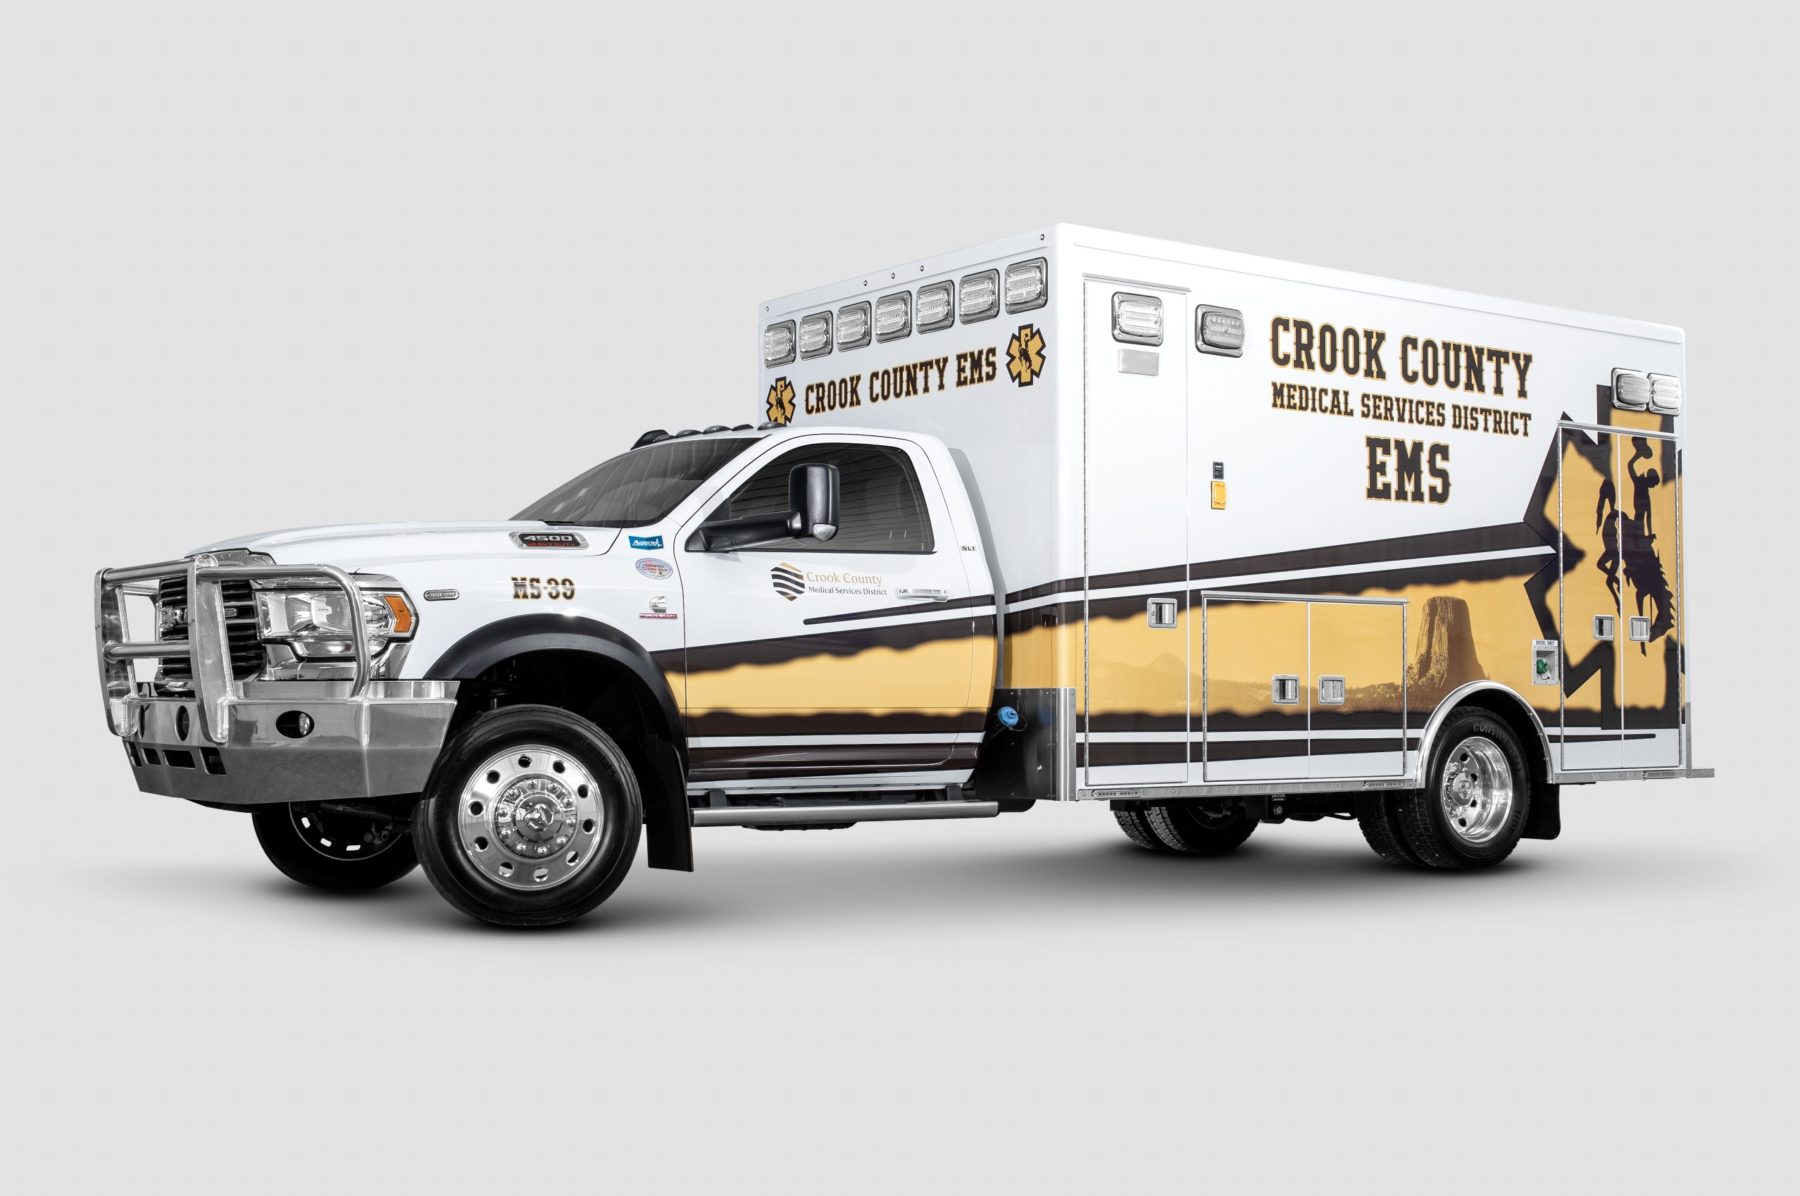 2019 Ram 4500 4x4 Heavy Duty Ambulance For Sale – Picture 1